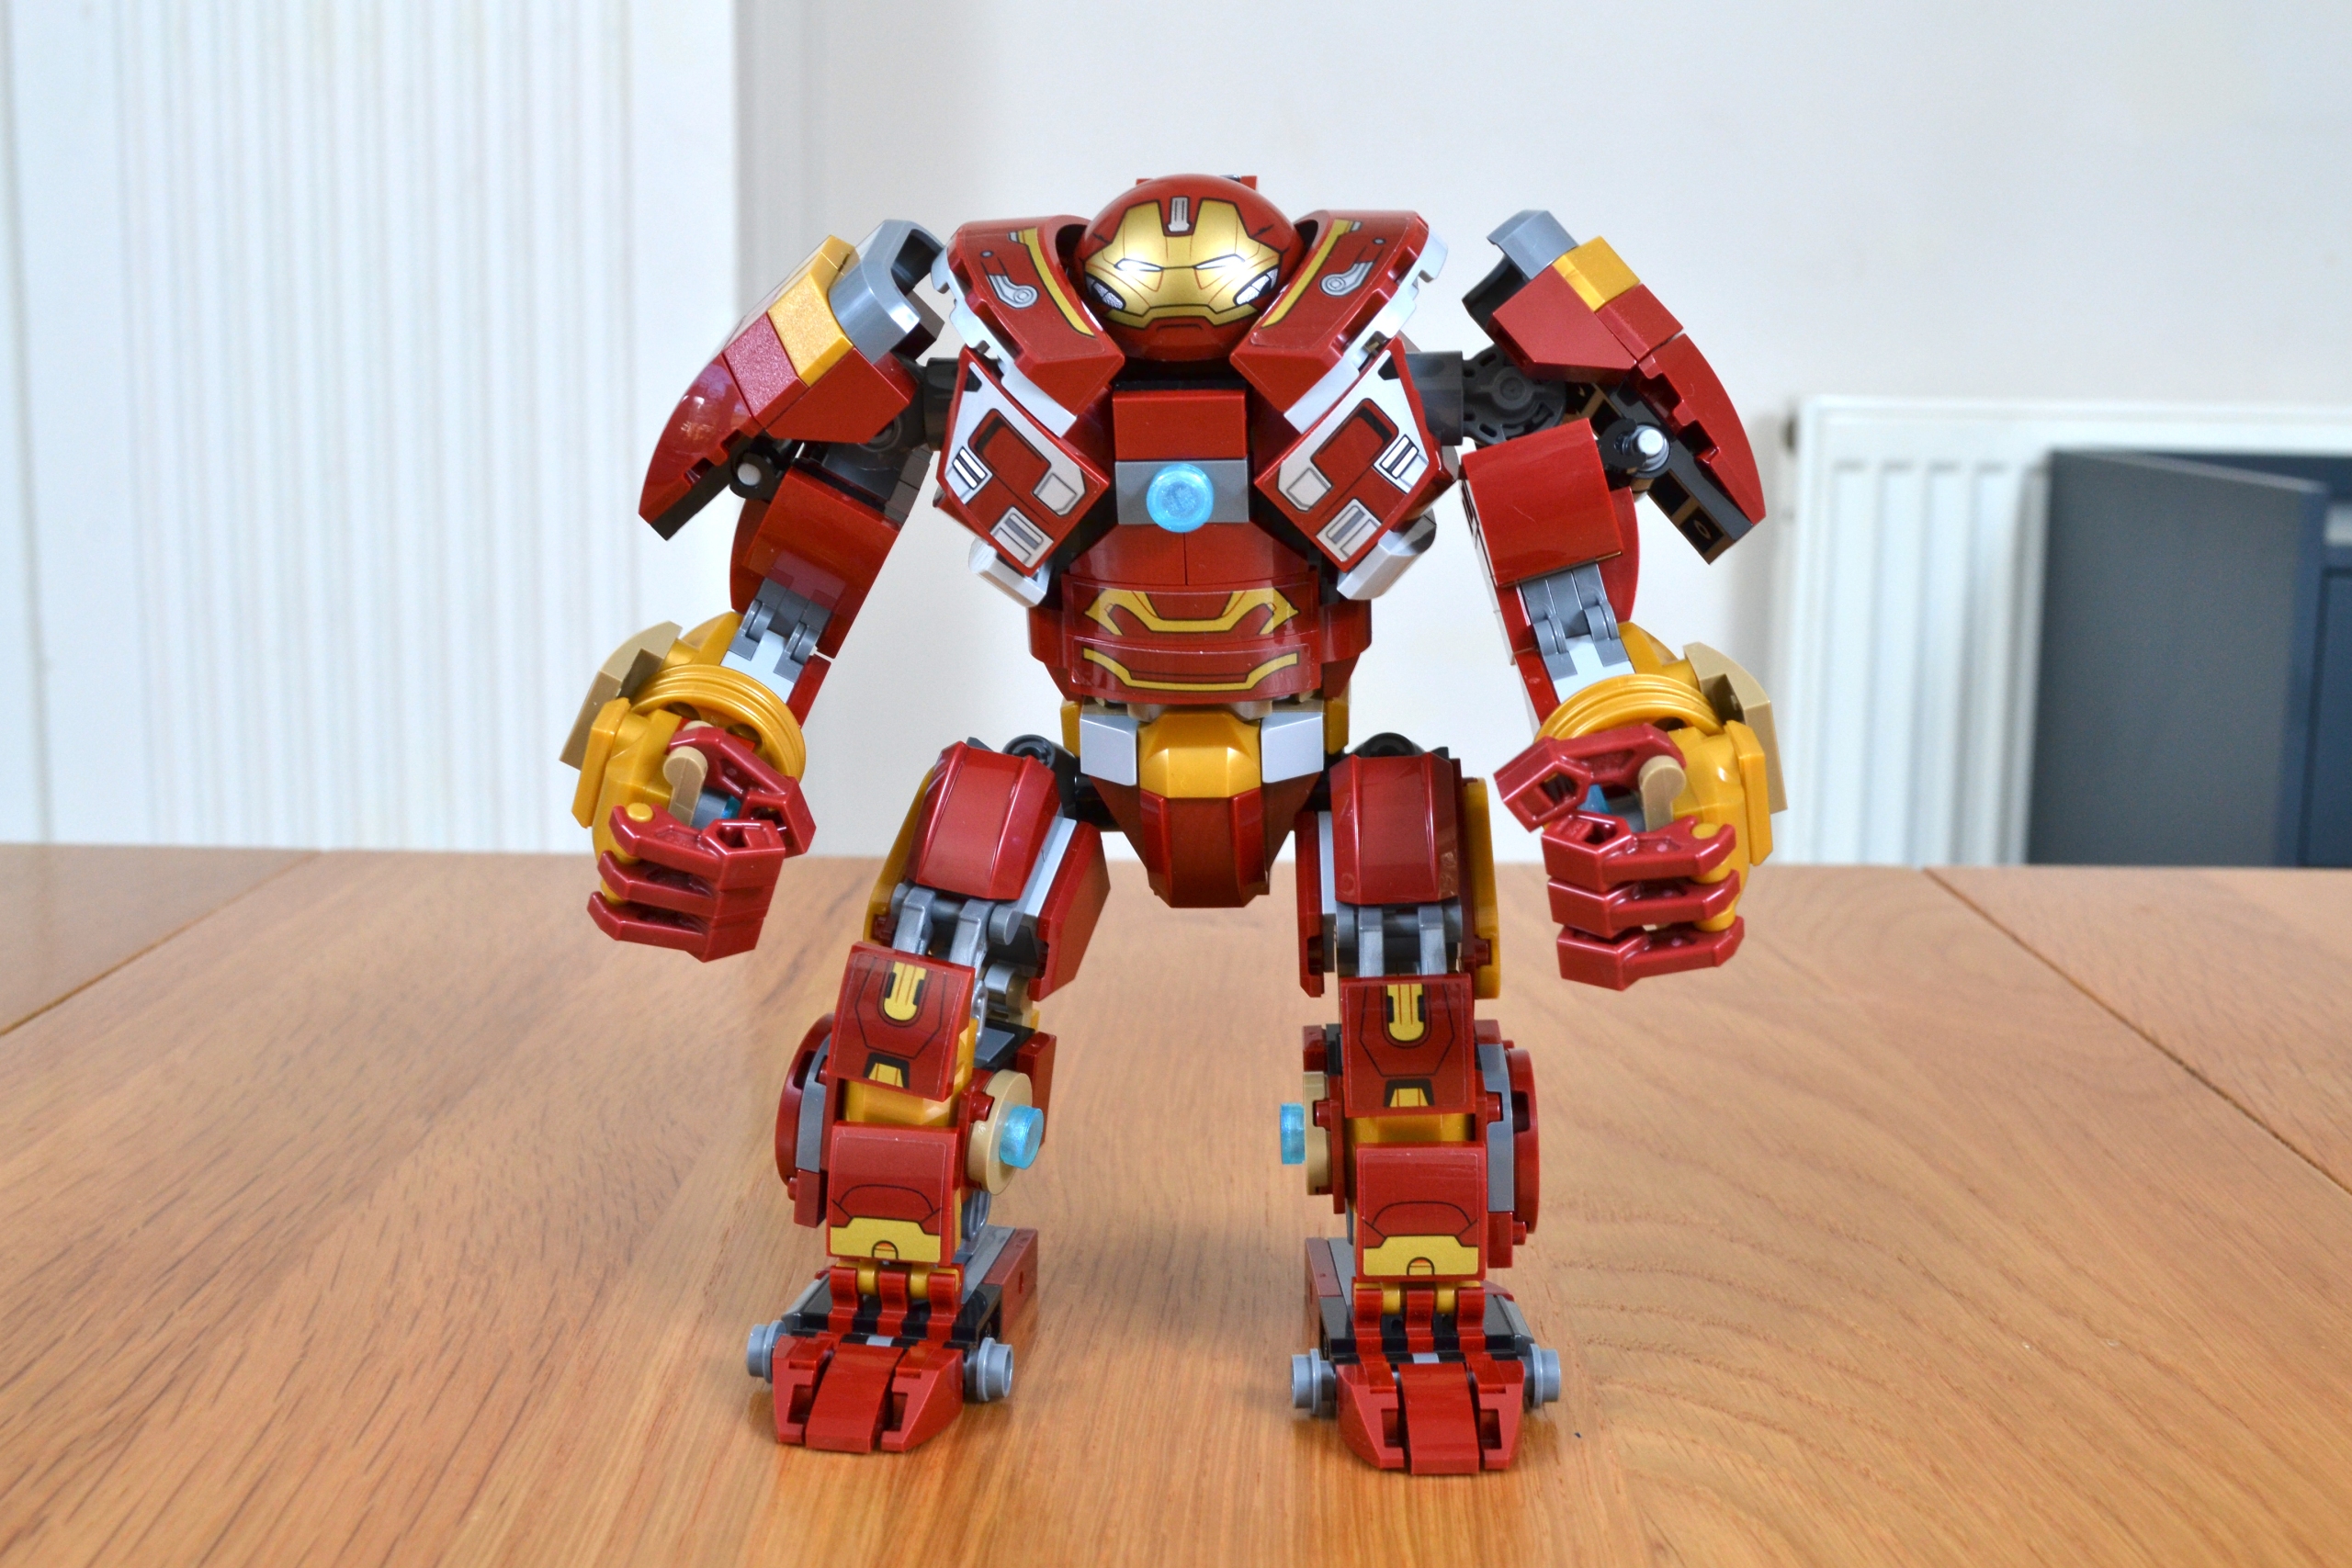 LEGO *No Minifigs Super Heroes HULKBUSTER MECH from 76031 - The